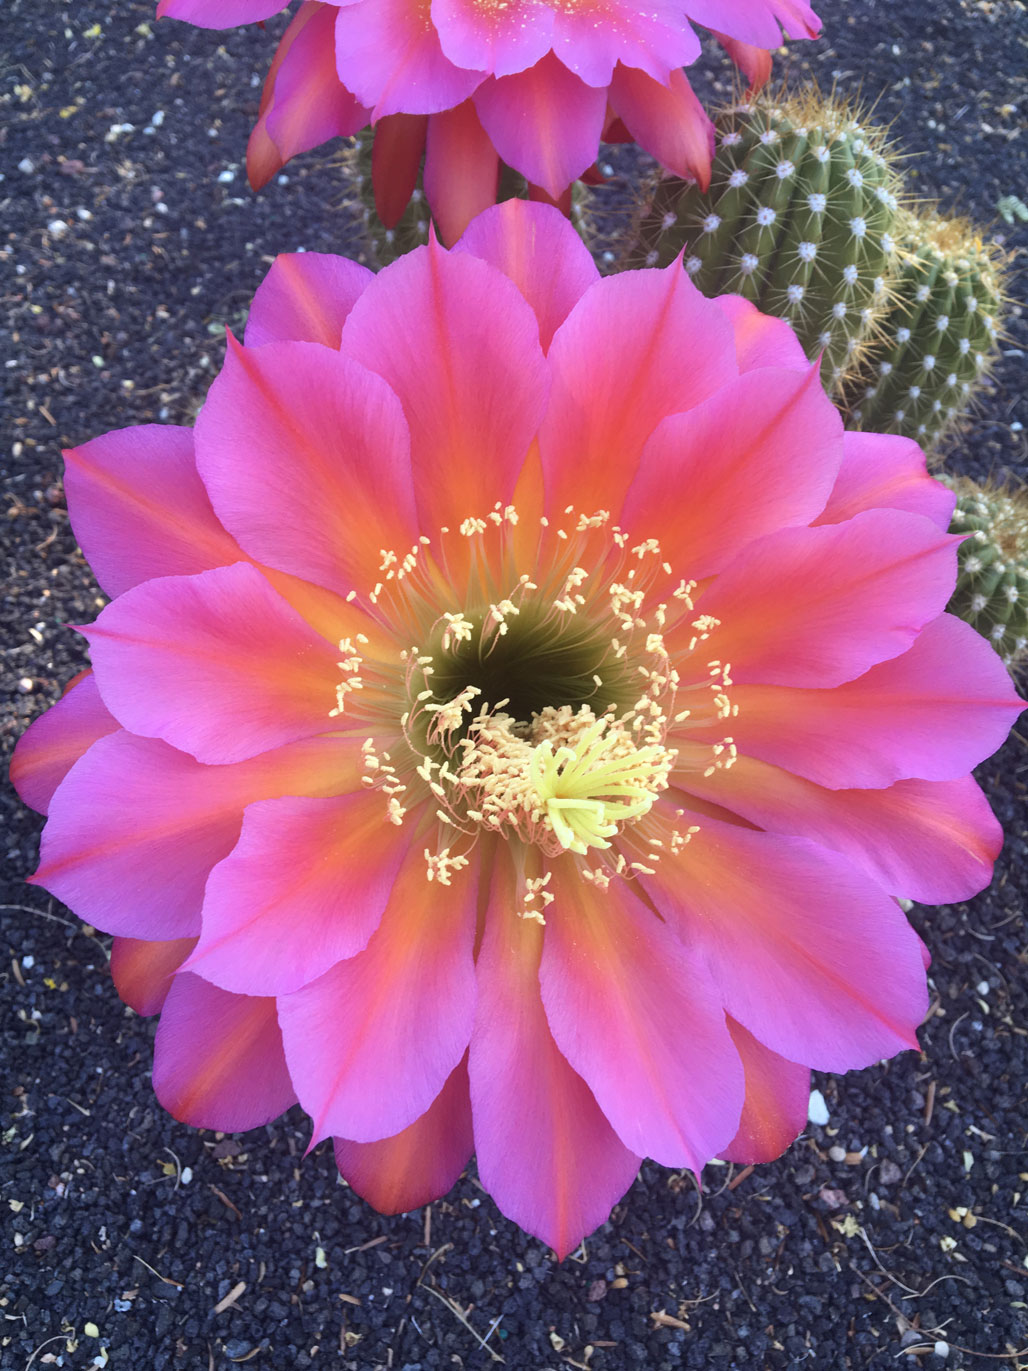 A close-up of a bright pink Torch Cactus flower.